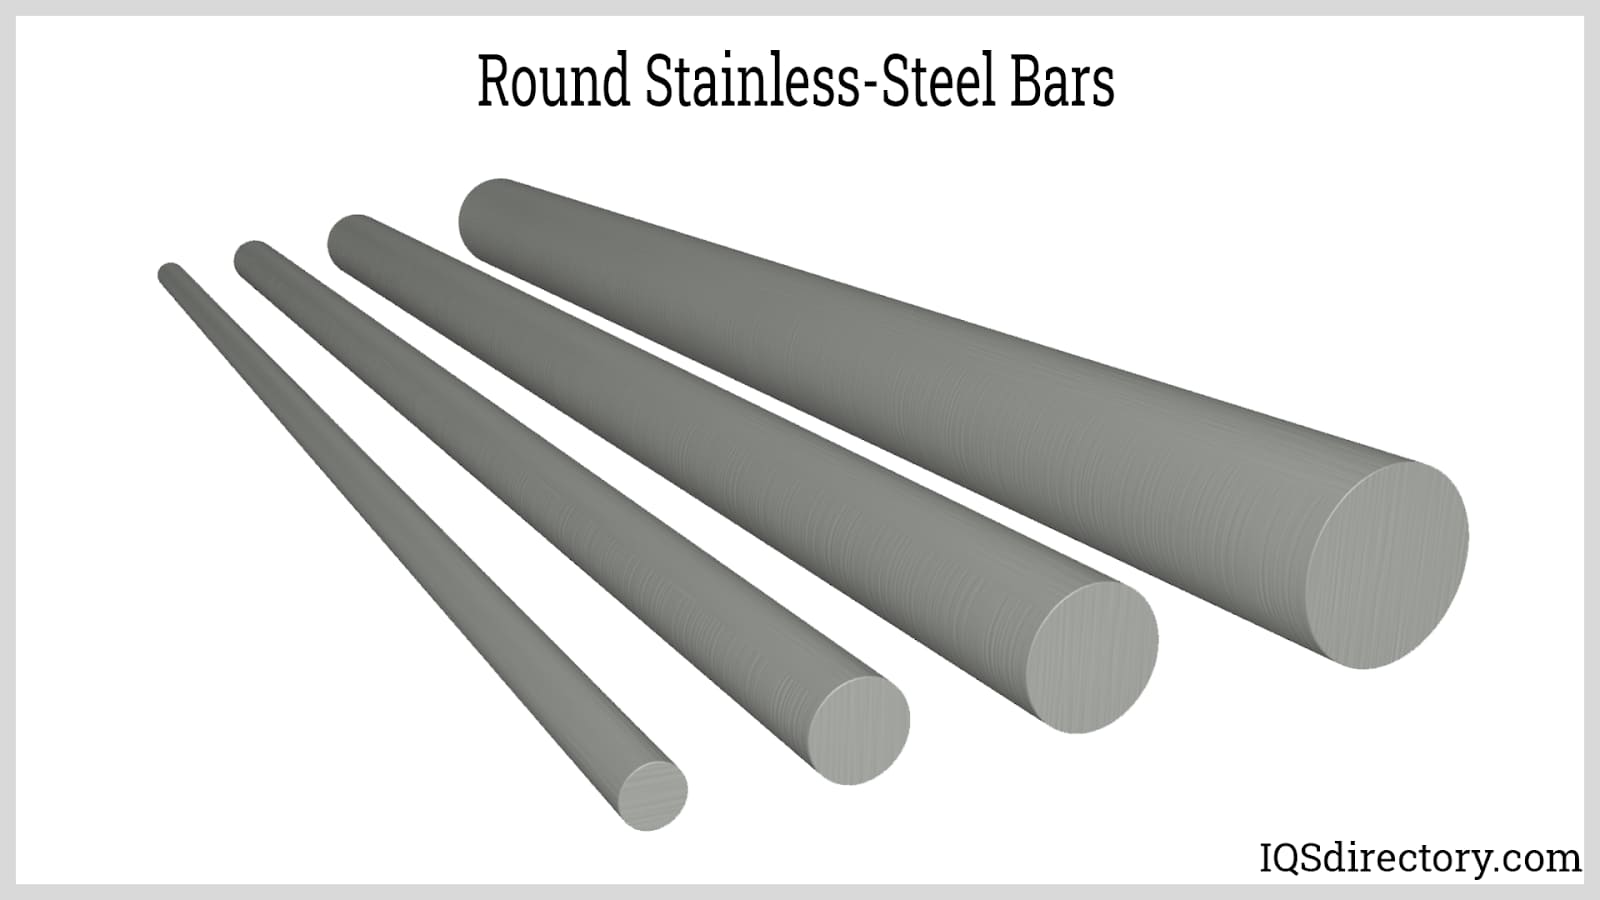 Round Stainless-Steel Bars